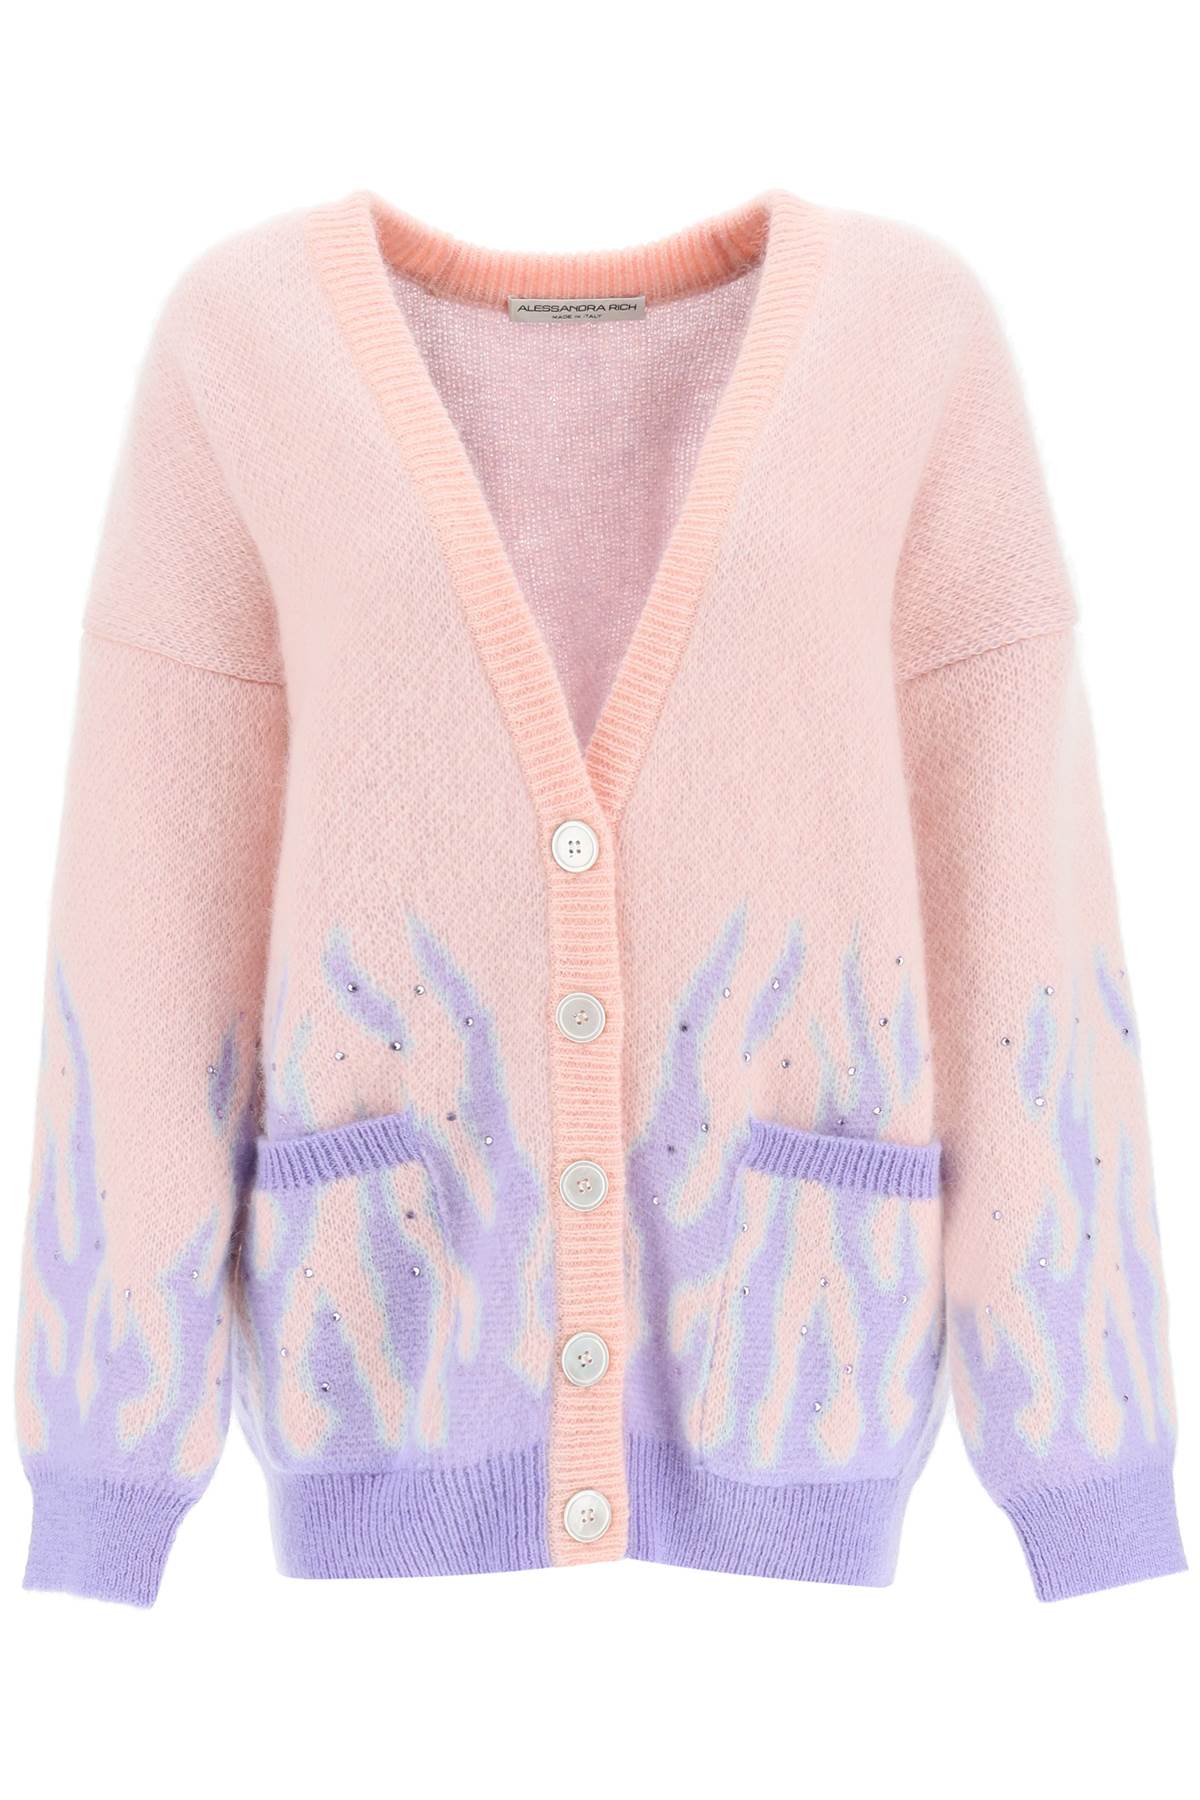 ALESSANDRA RICH MOHAIR-BLEND FLAME CARDIGAN